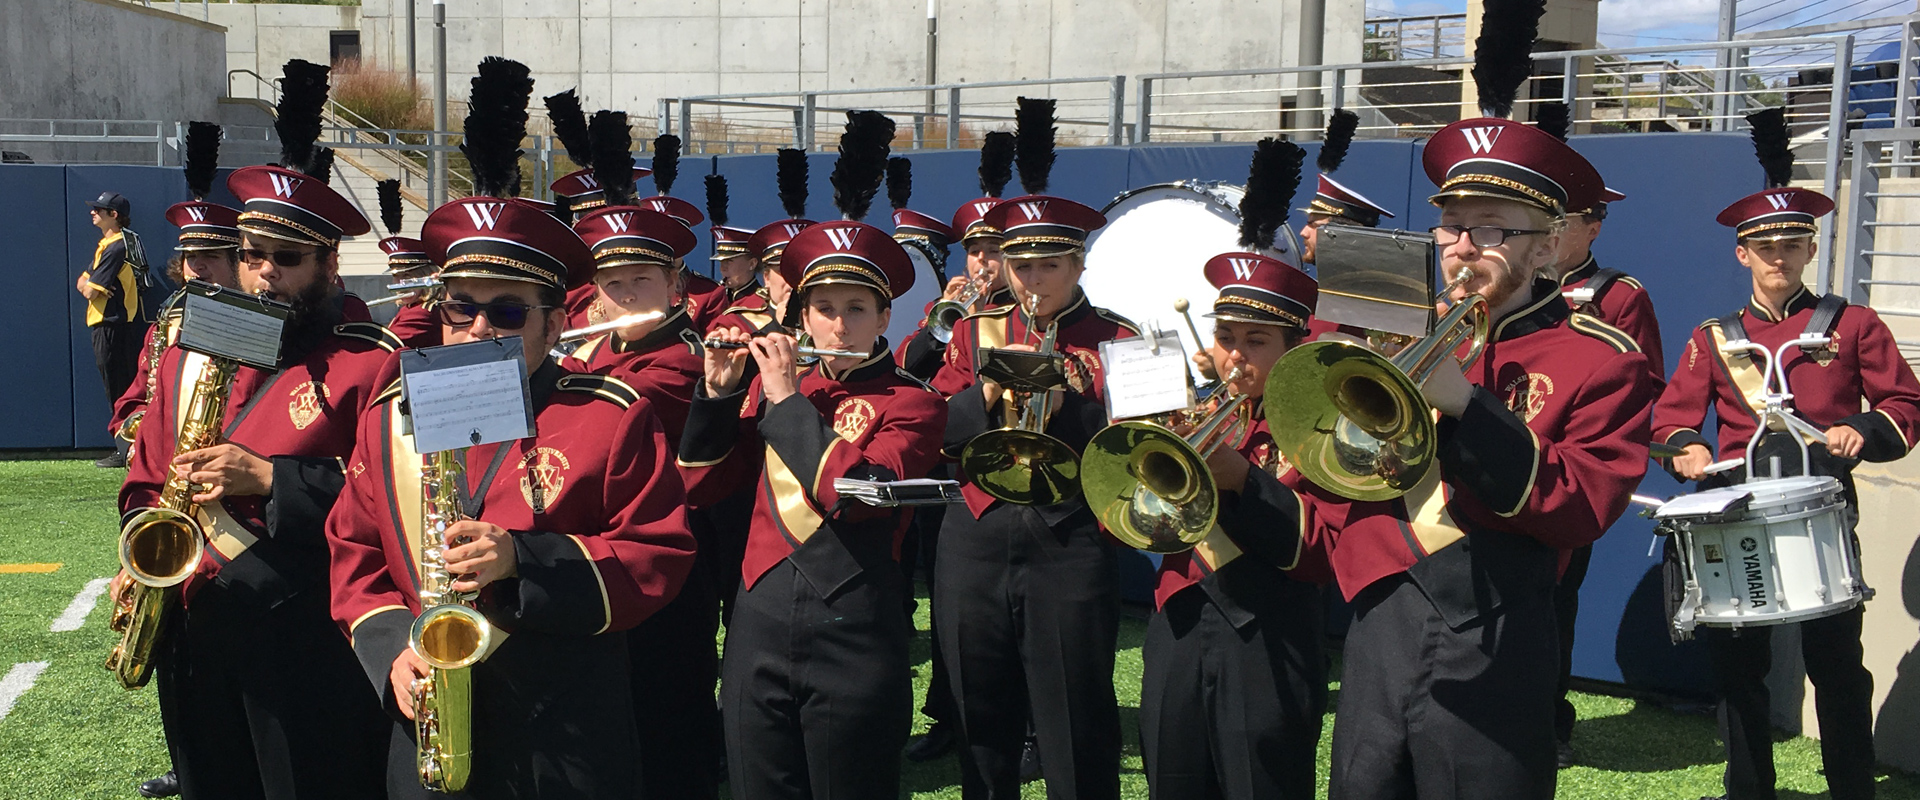 photo of the Walsh marching band performing at a football game